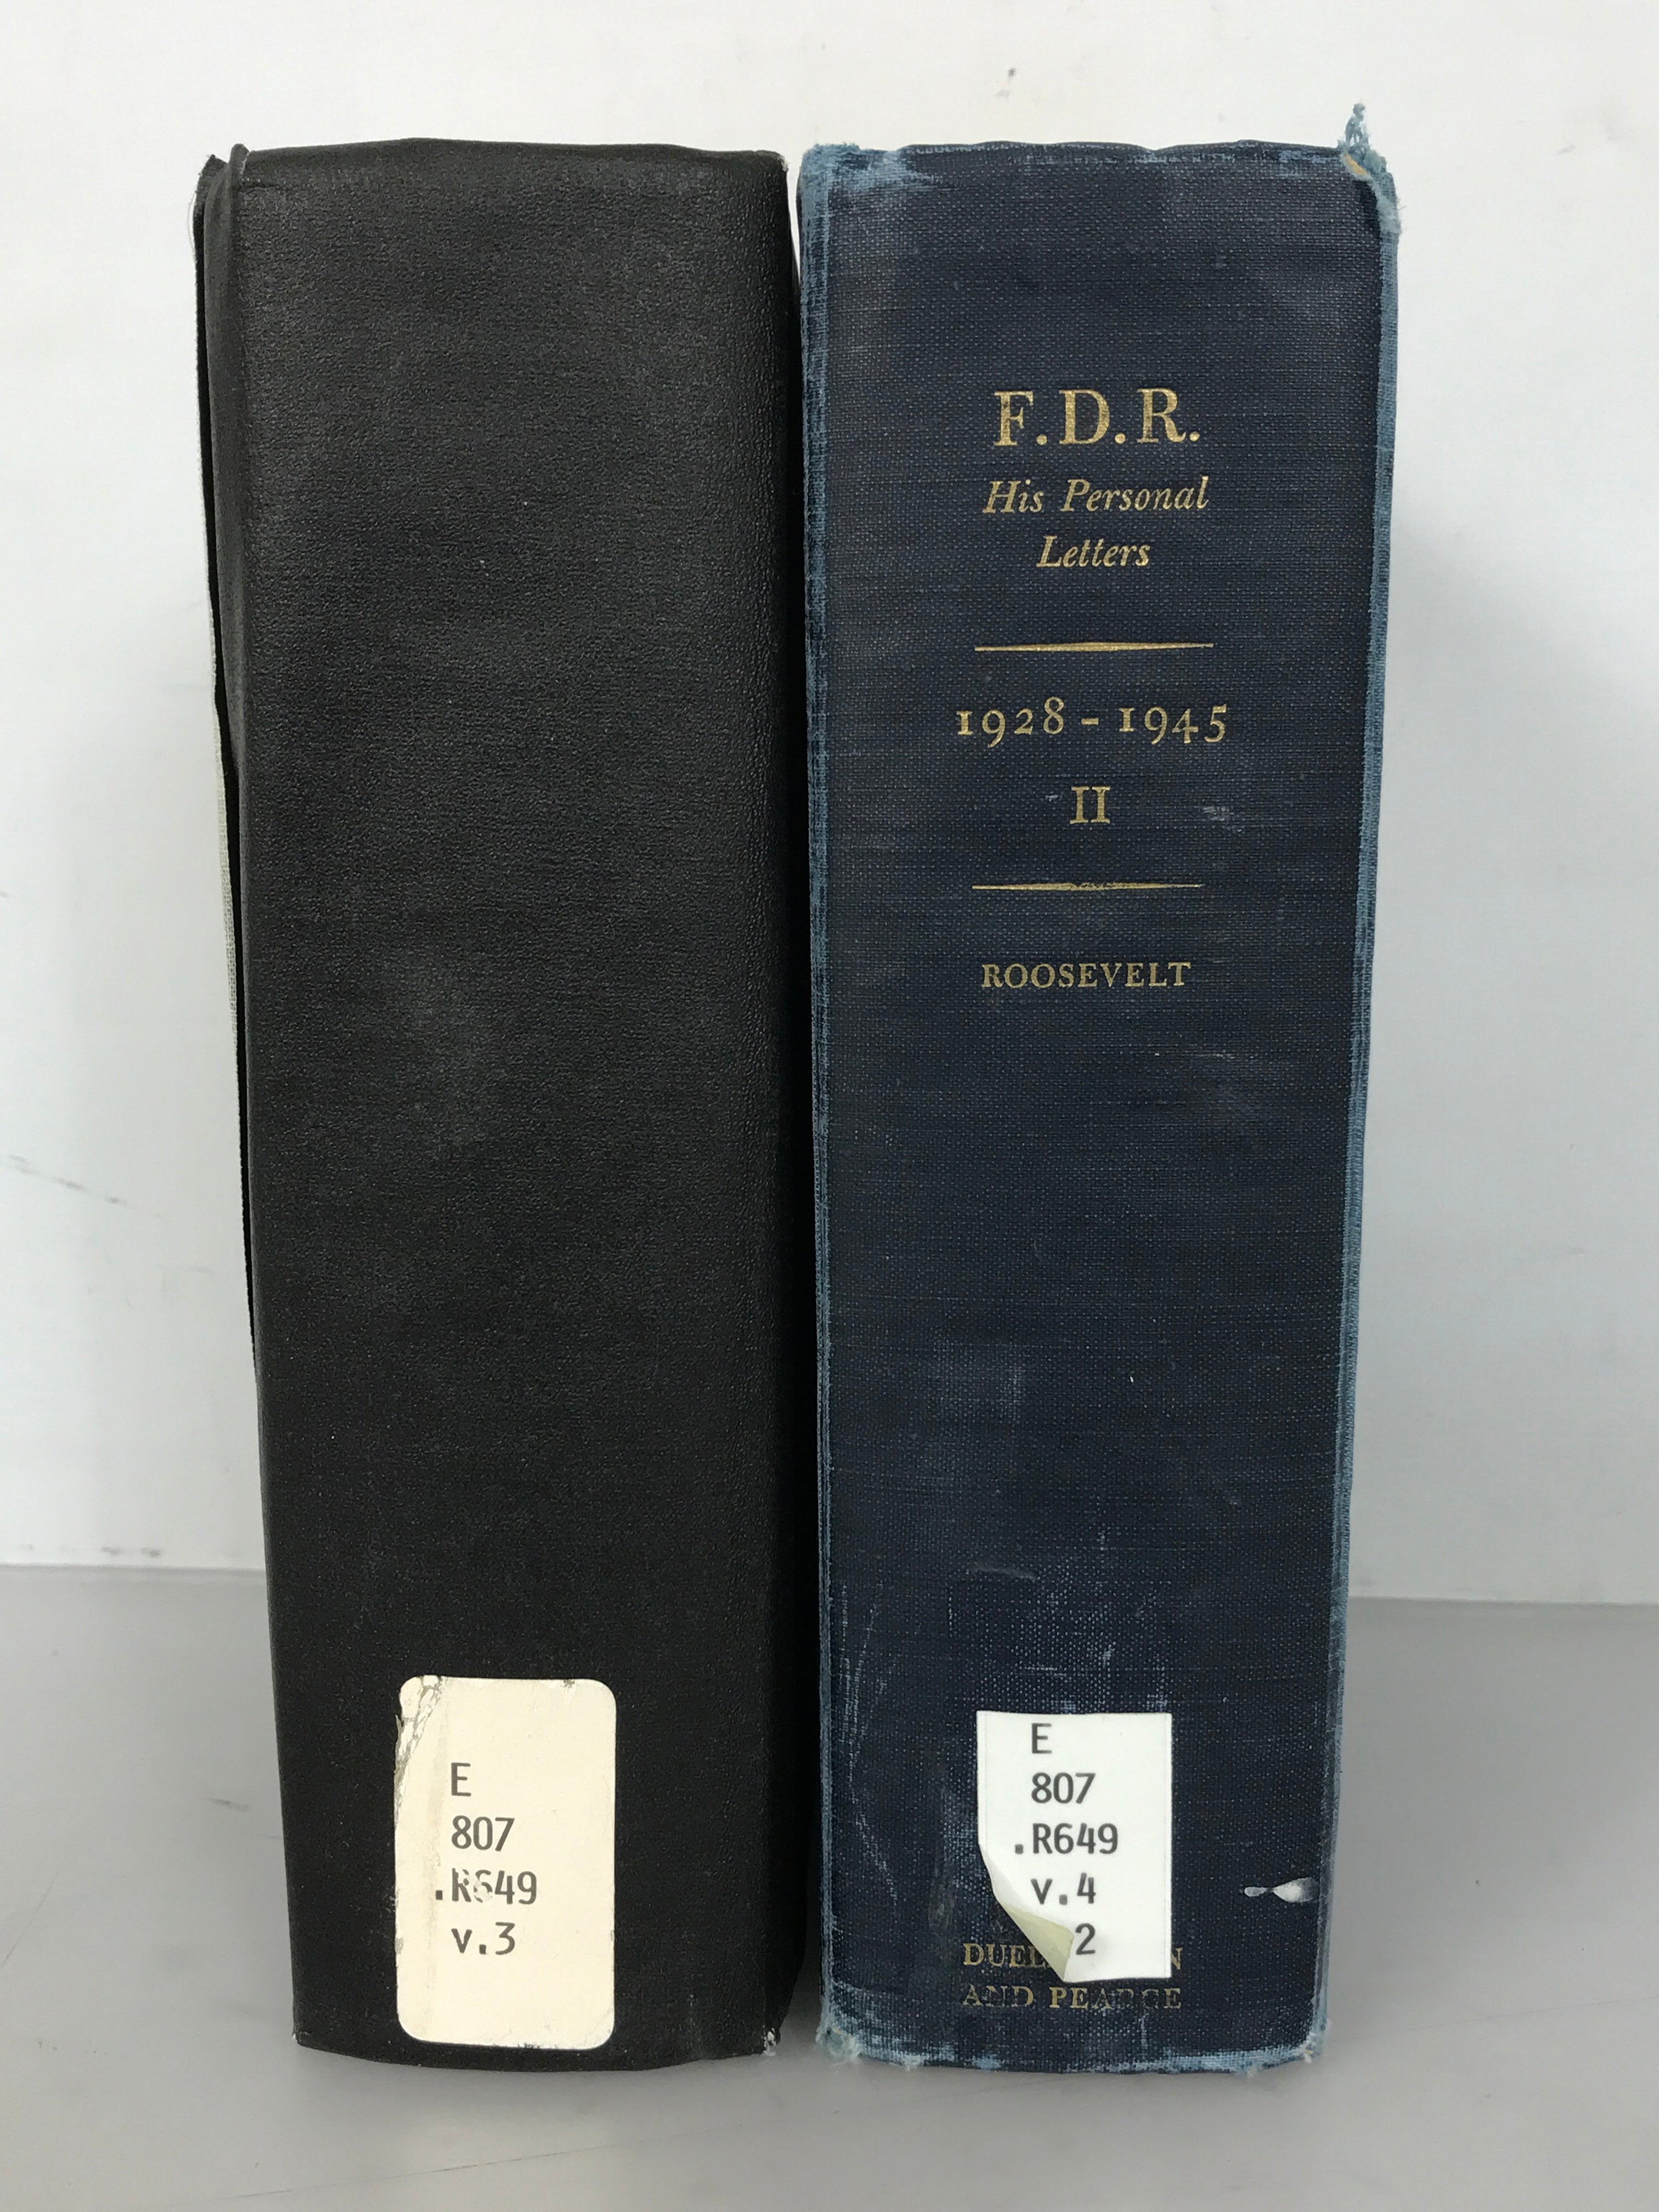 2 Volume Set: F.D.R. His Personal Letters 1928-1945 by Elliott Roosevelt (1950) First Edition Former Library Copies